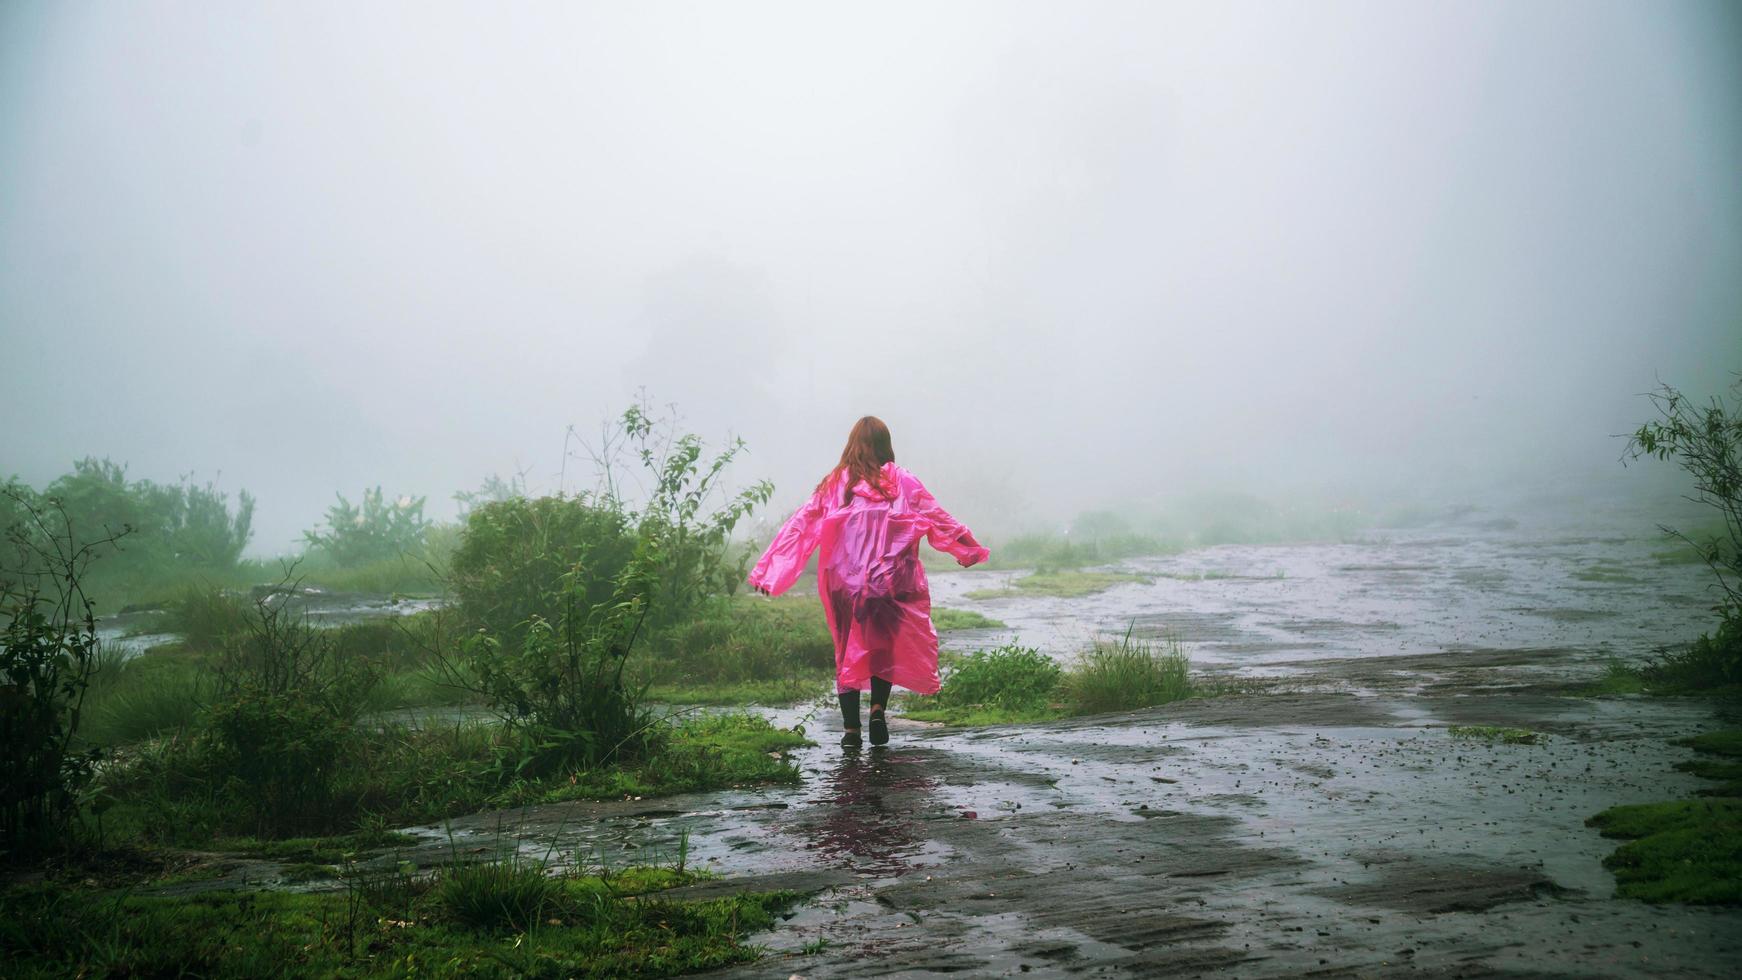 tourist with pink rain coat Stand View the scenery natural beautiful touch fog at Phu Hin Rong Kla National Park. travel nature, Travel relax, Travel Thailand, rainy season. photo